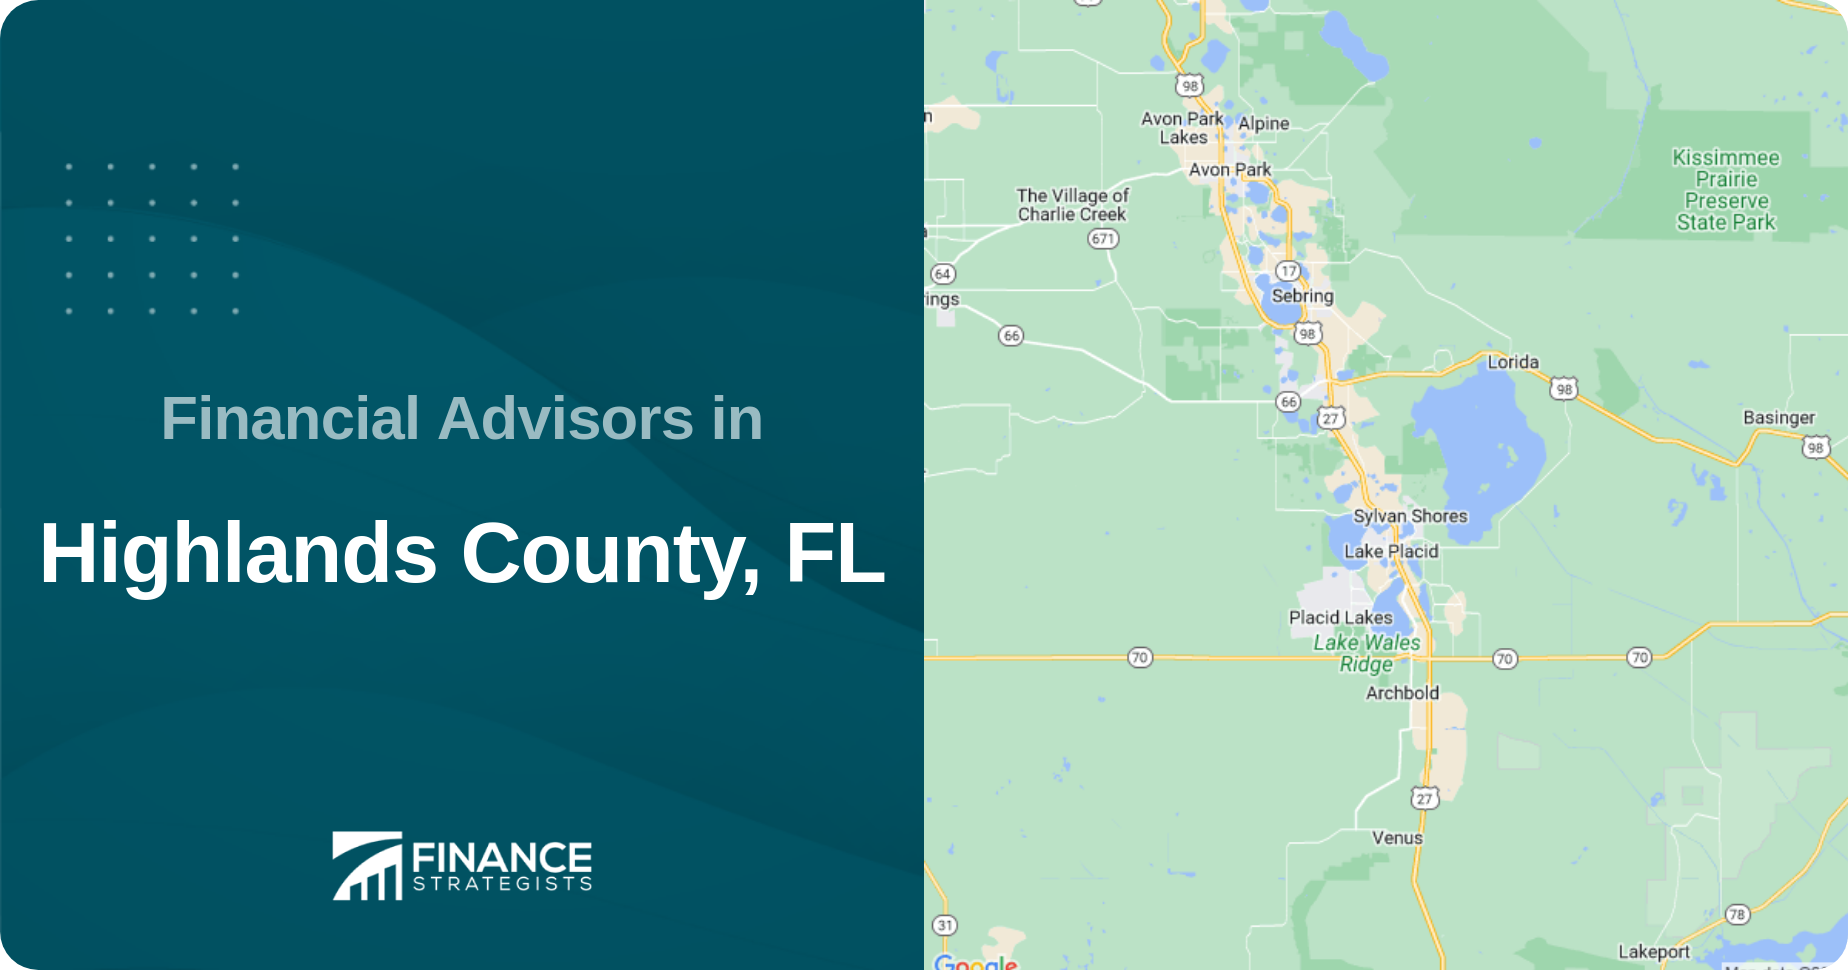 Financial Advisors in Highlands County, FL